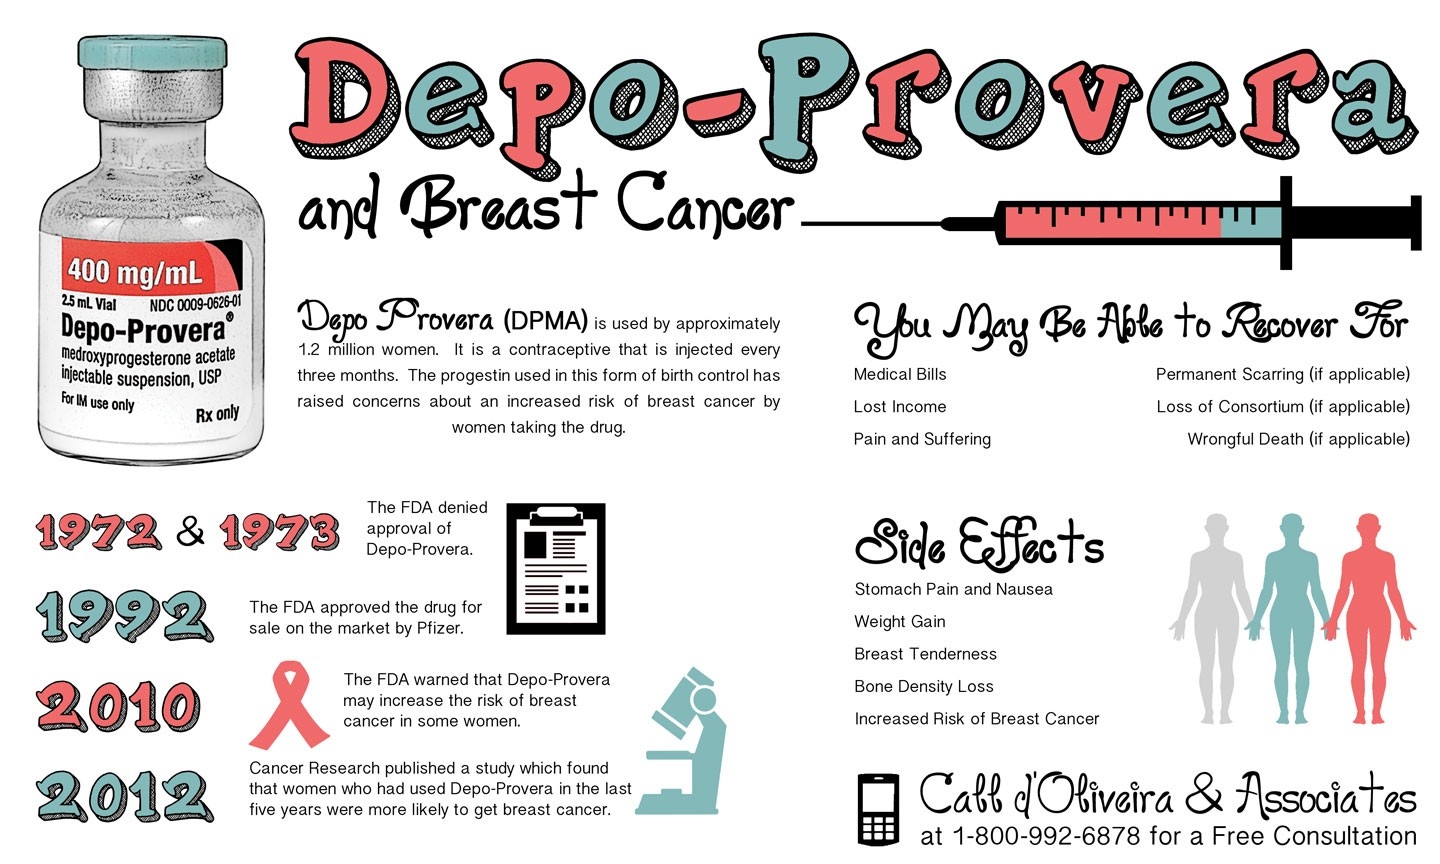 Depo Provera Injection Linked To Breast Cancer? | Emma4Facs  Depo-Provera Injection Schedule